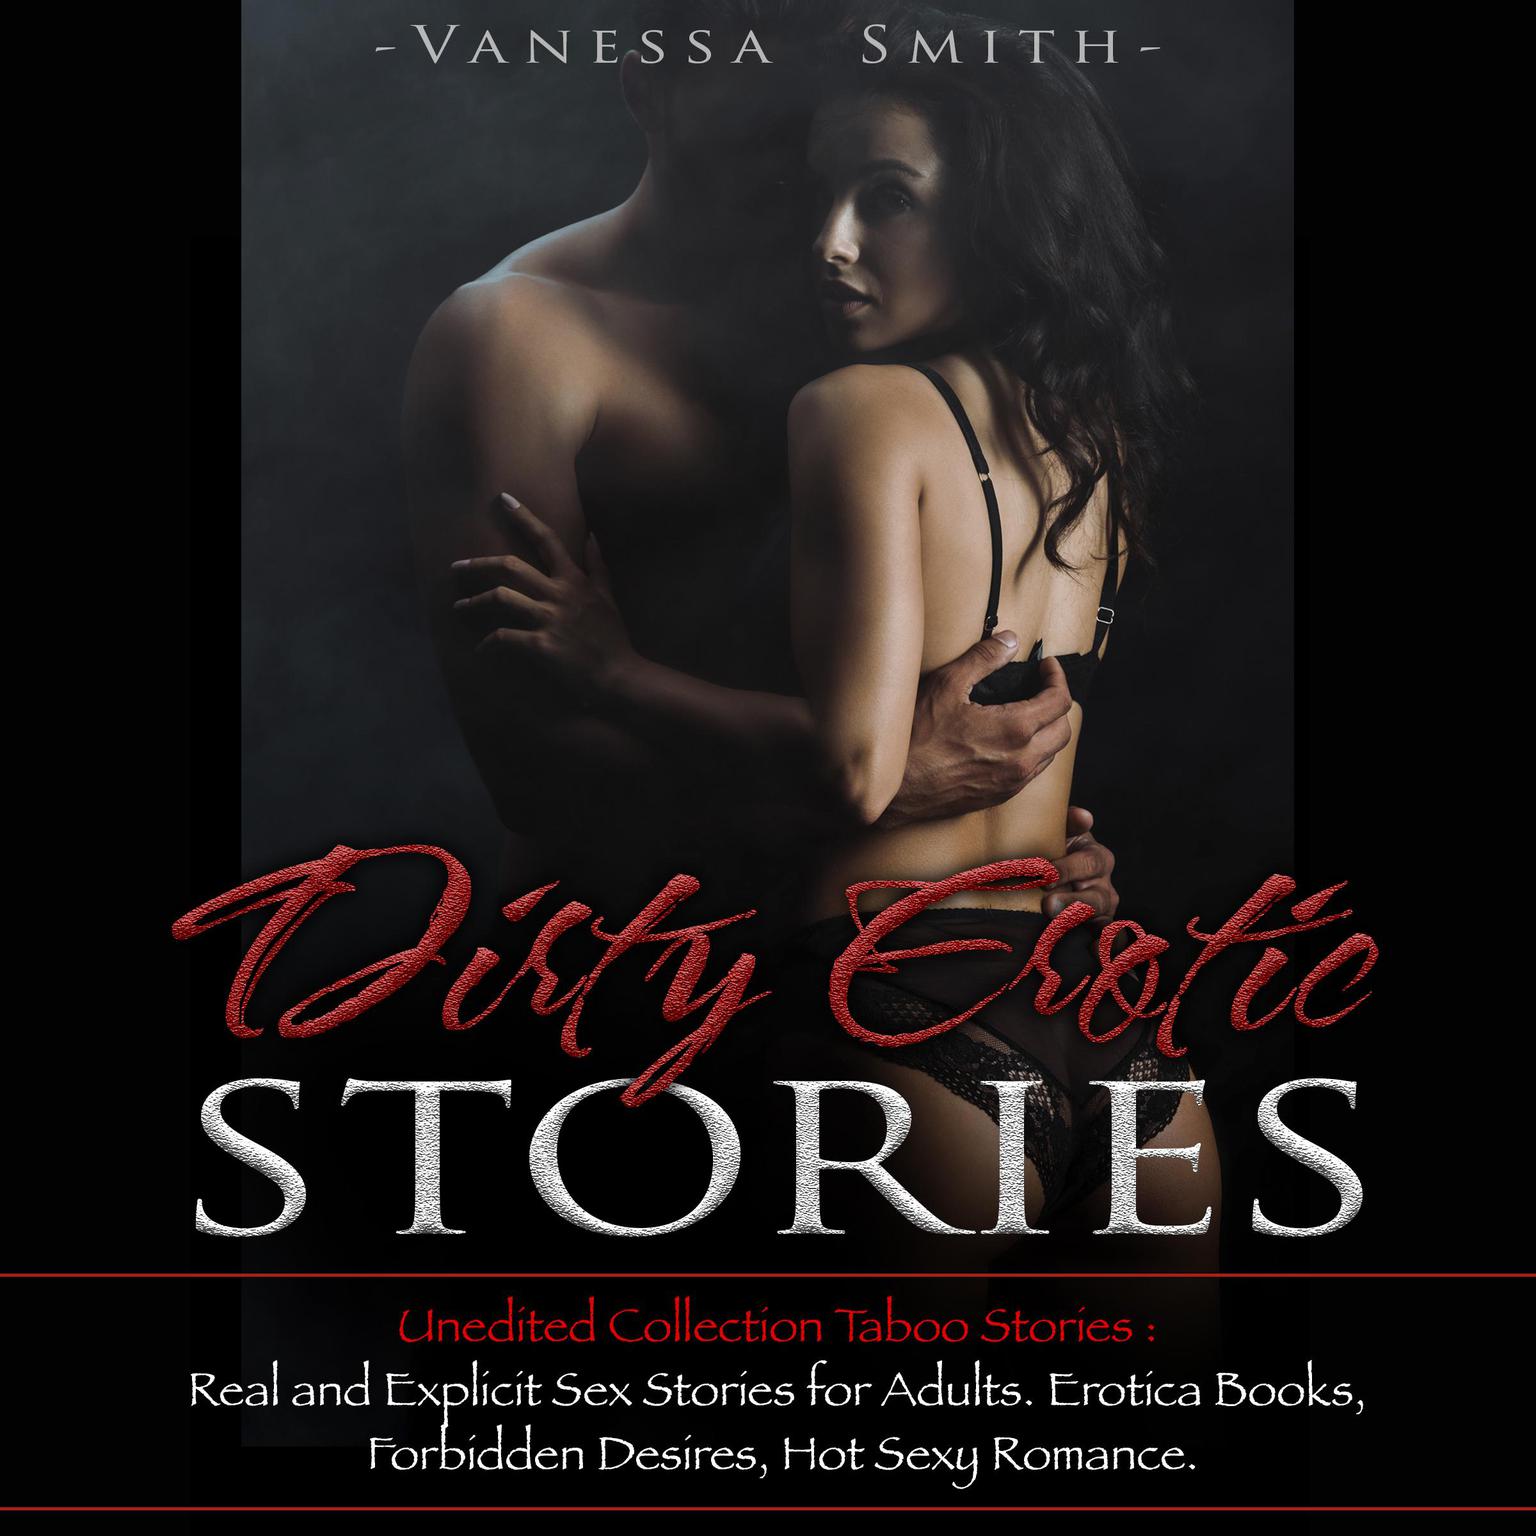 Dirty Erotic Stories Audiobook, by Vanessa Smith